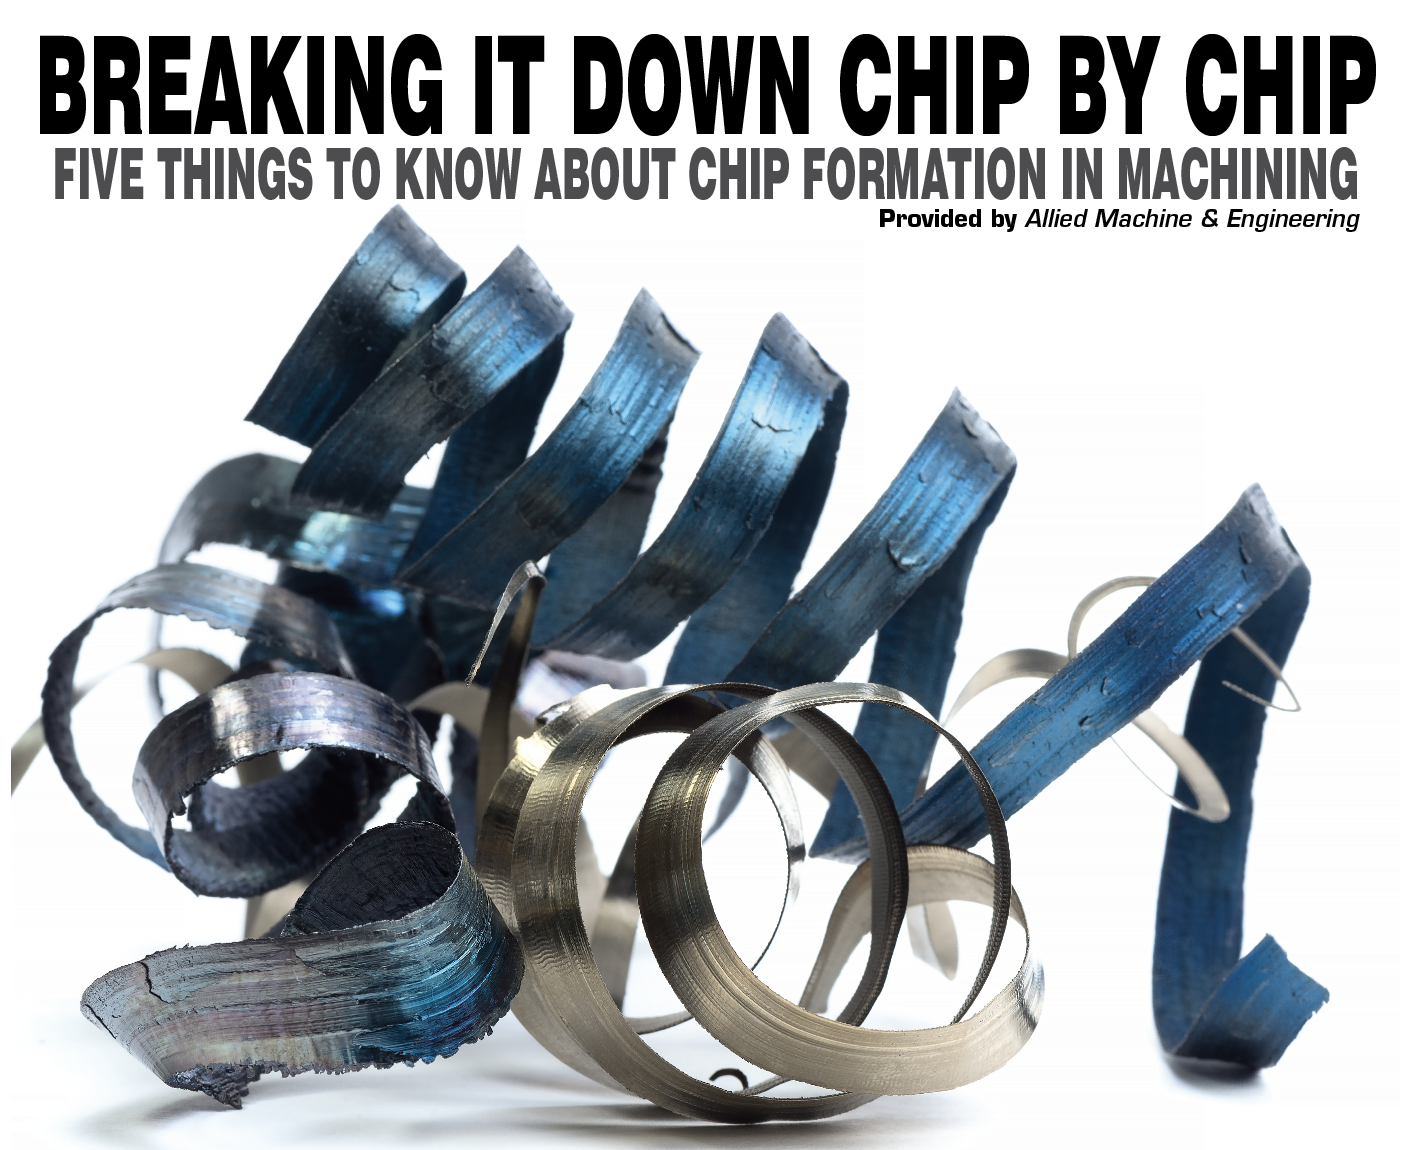 Breaking It Down Chip by Chip – Five Things to Know About Chip Formation in Machining